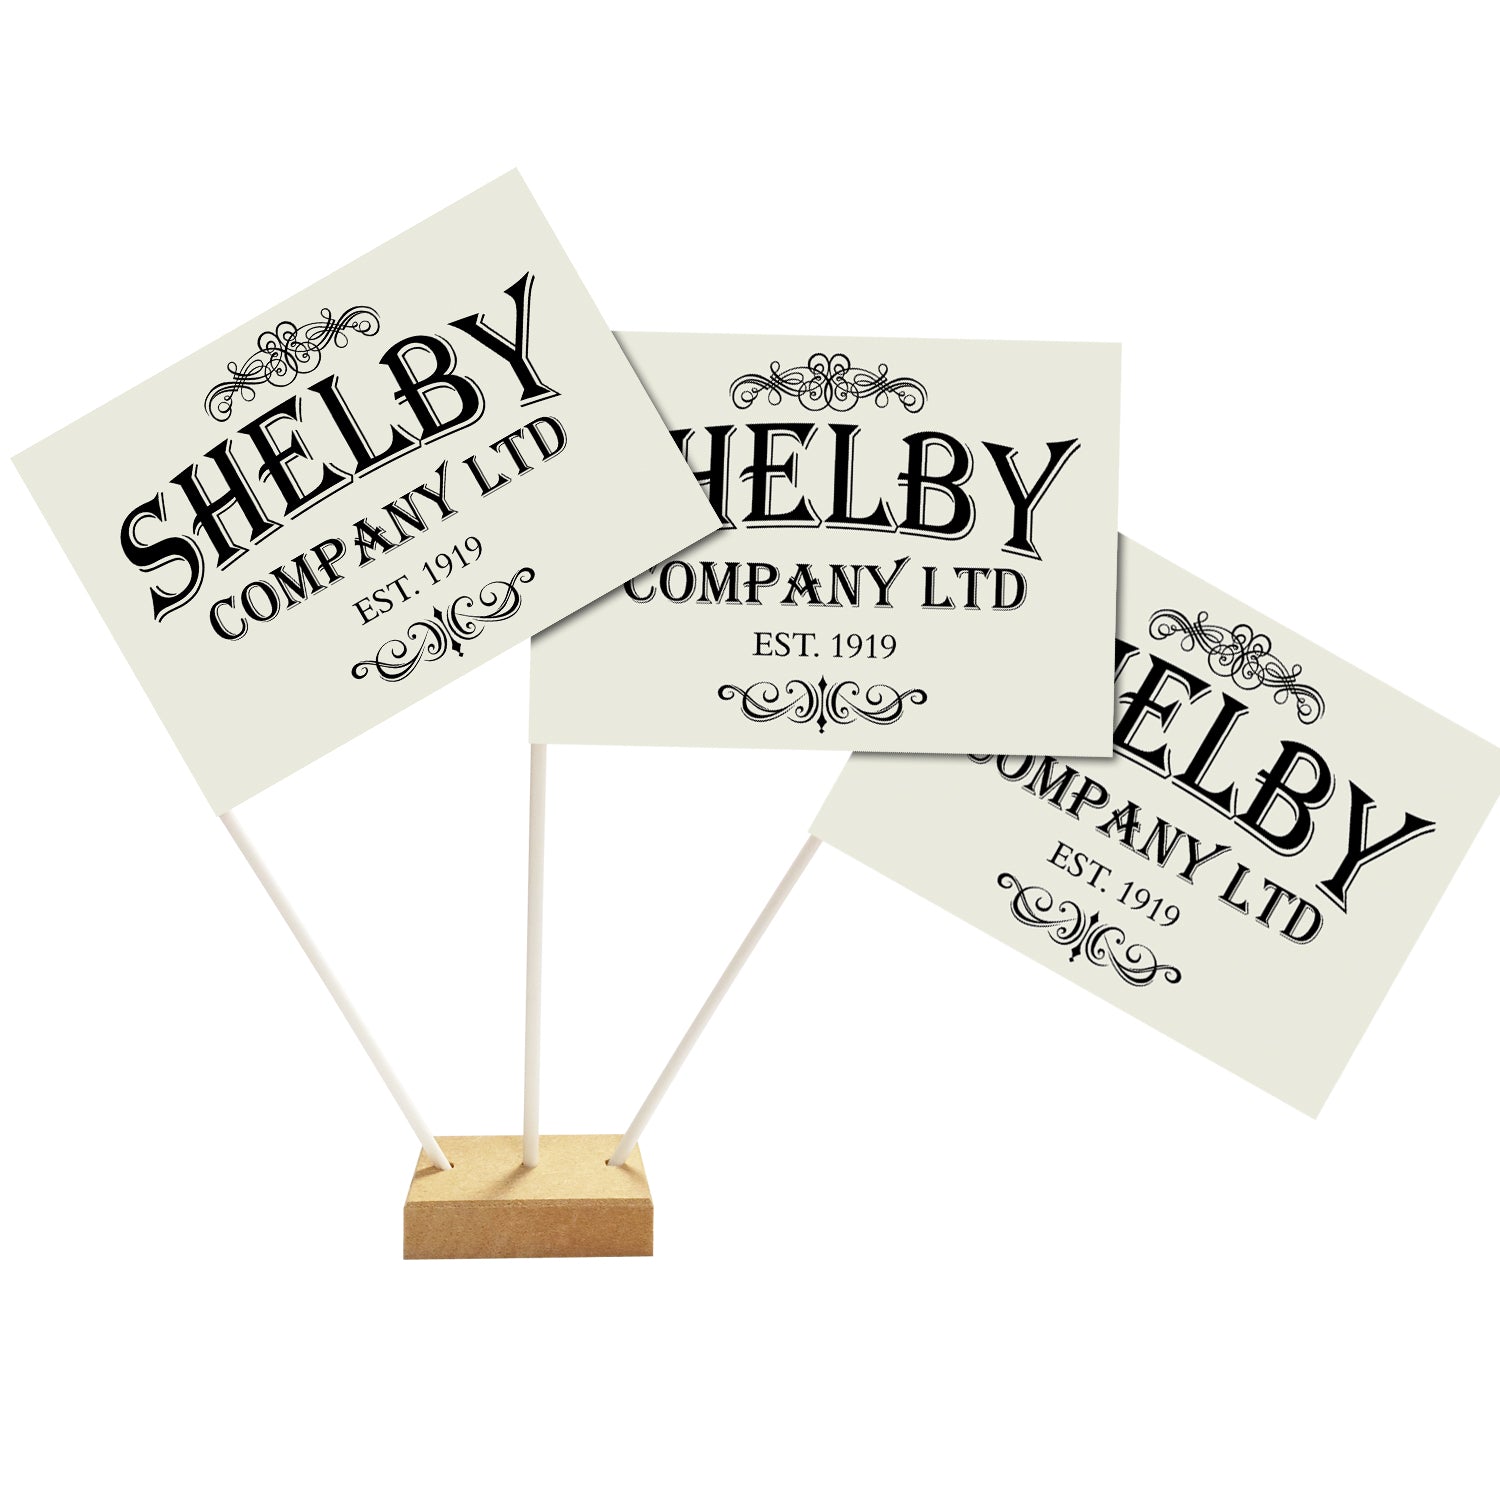 Shelby Company Ltd Peaky Gangsters Table Flag Decorations 15cm on 24cm Pole